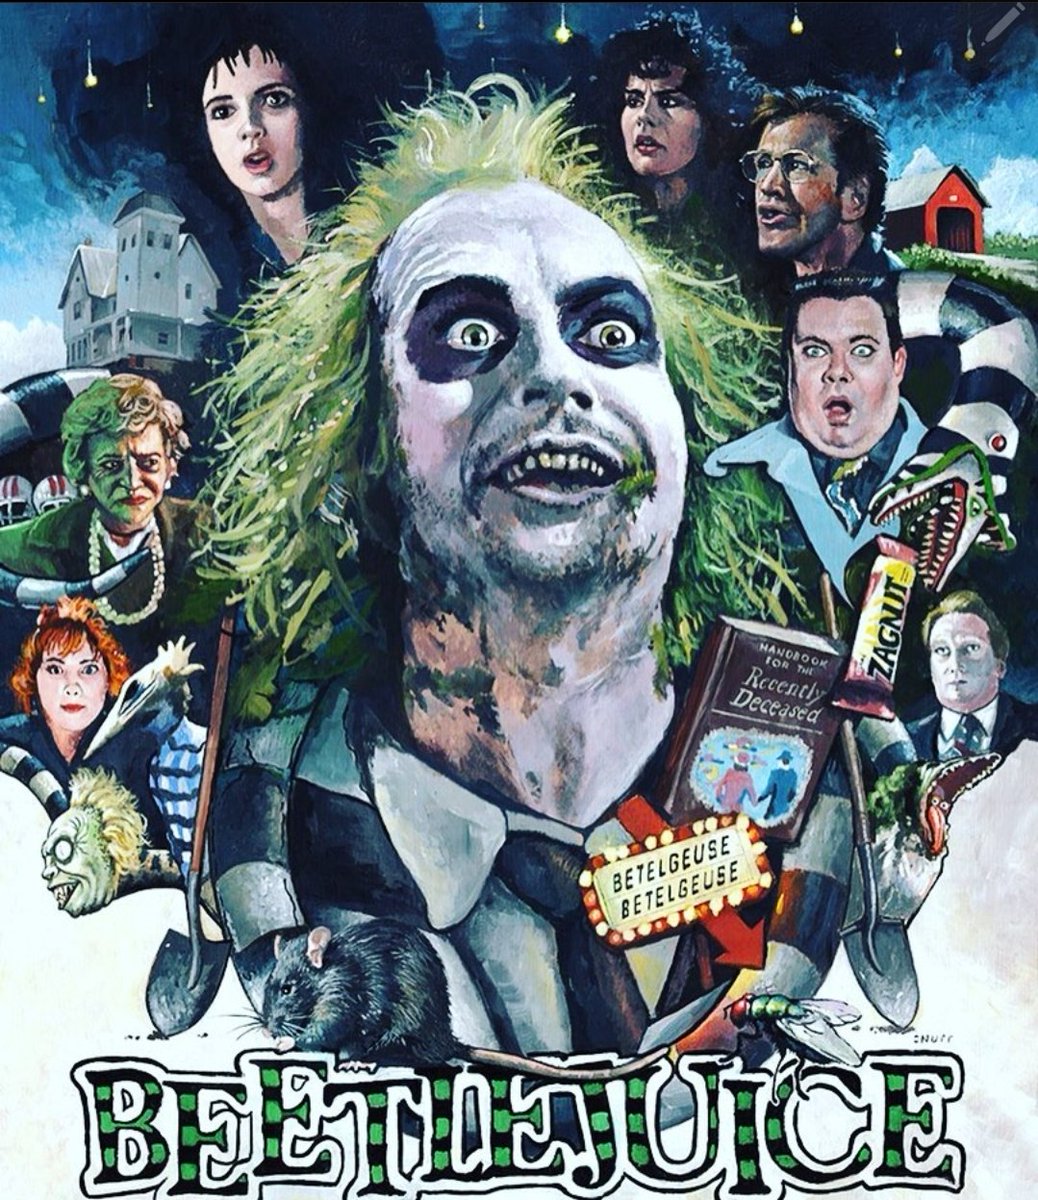 Dropping on Halloween Day the last
episode in our Halloween series -BEETLEJUICE- #podcast #podcasts #whitebataudio
#moviepodcast #moviereview #beer #drunkpodcast
#moviefacts #classic #podcastlife #art #subscribe #horror
#liqour #podcastlovers #comedy #eetlejuice #TheDEN